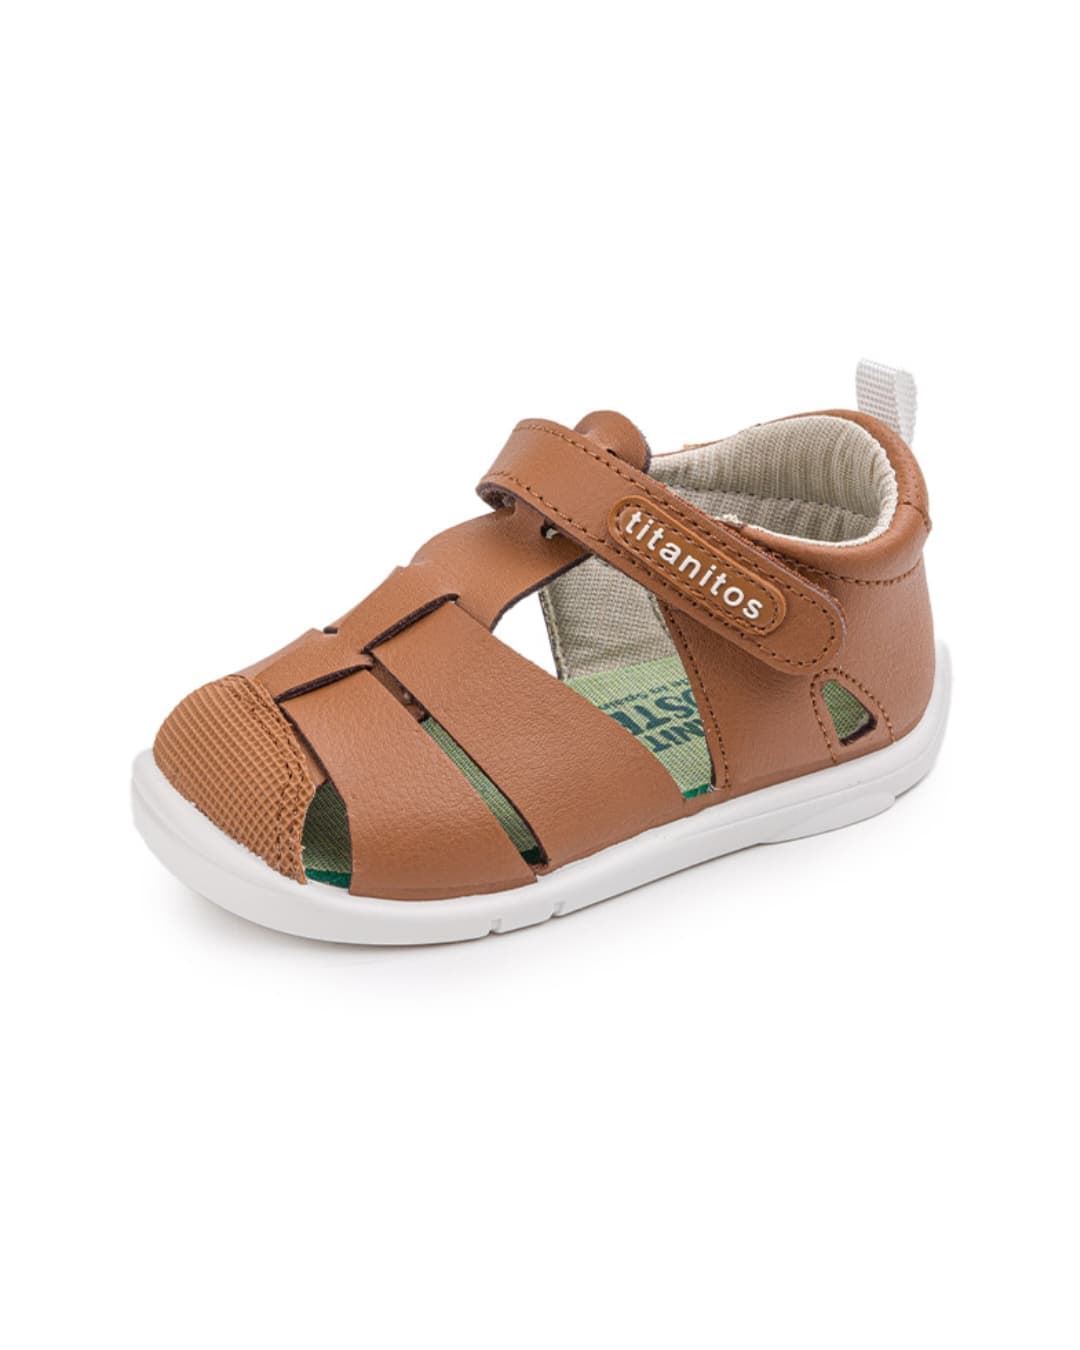 Titanitos Respectful baby sandals Eric Roble - Image 1